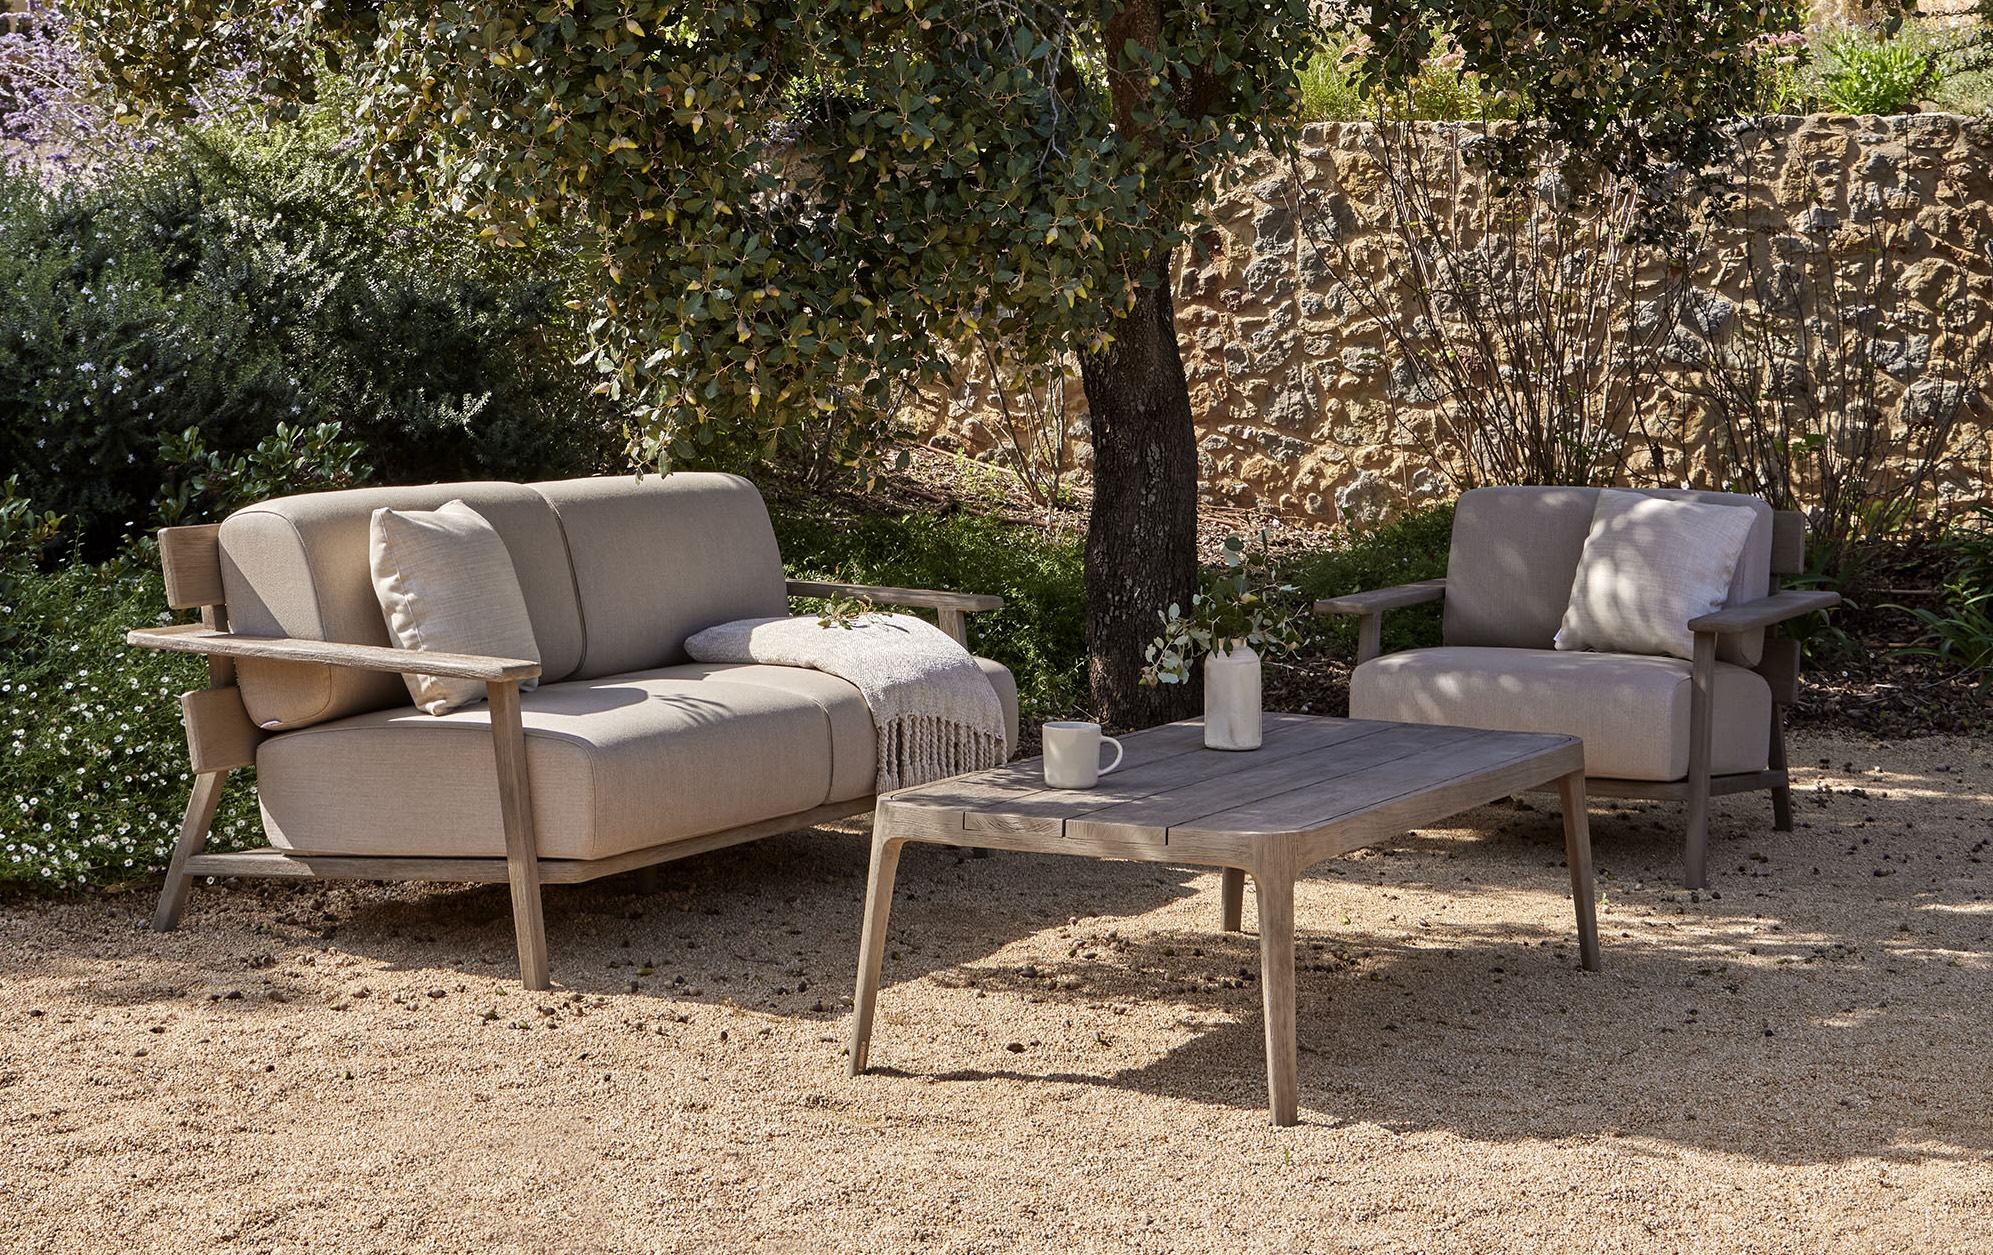 Paralel Outdoor Furniture Collection